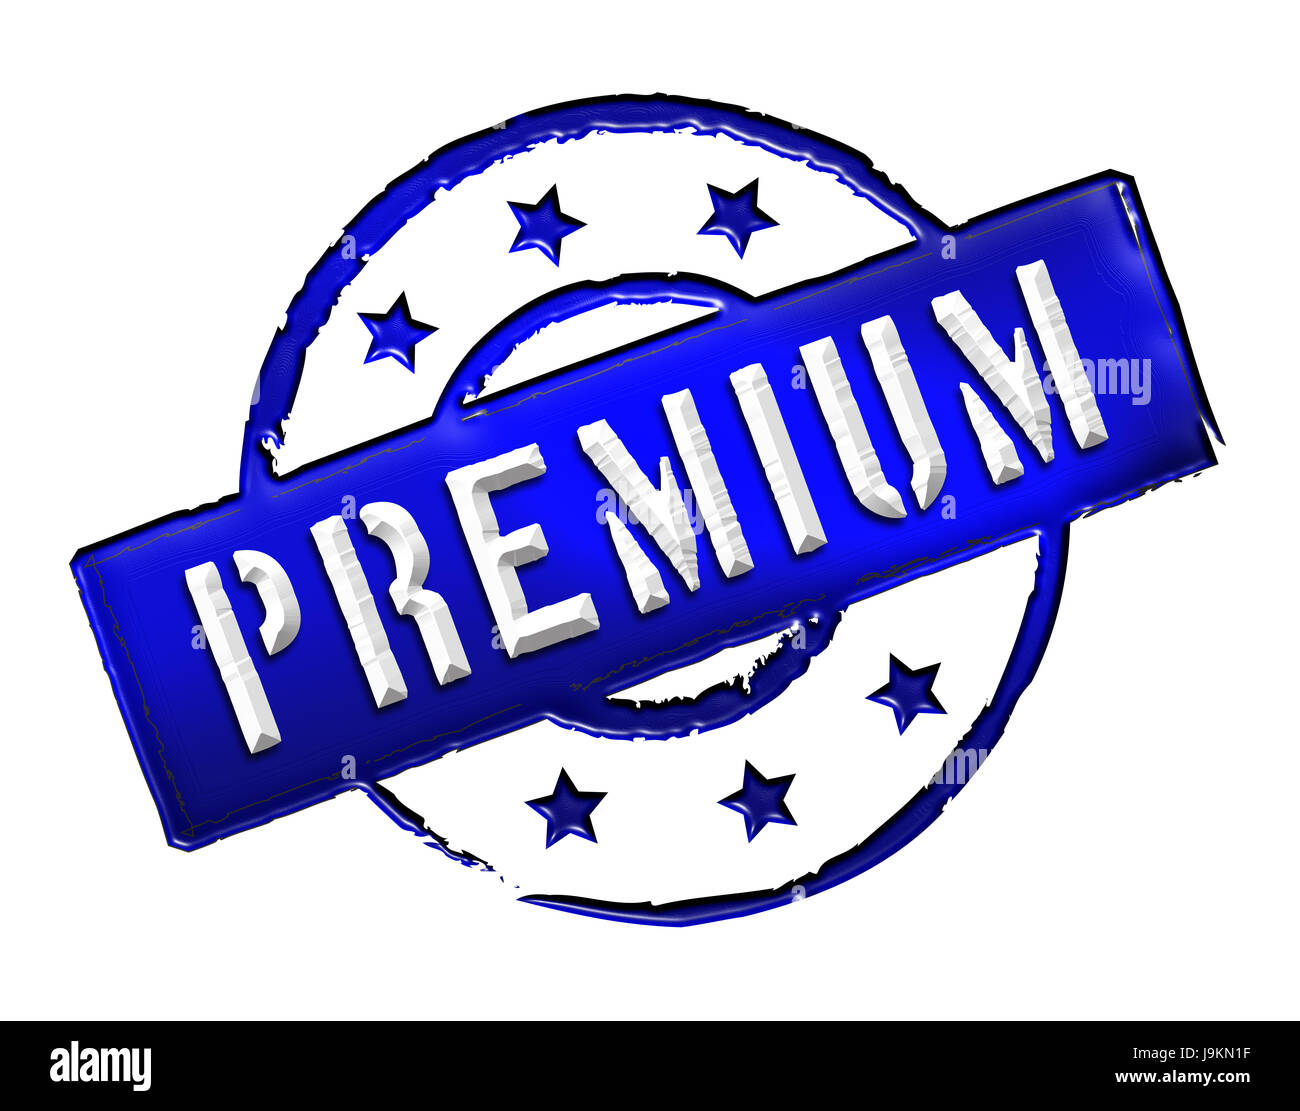 premium, isolated, caution, end, important, class, abstract, high, retro, Stock Photo